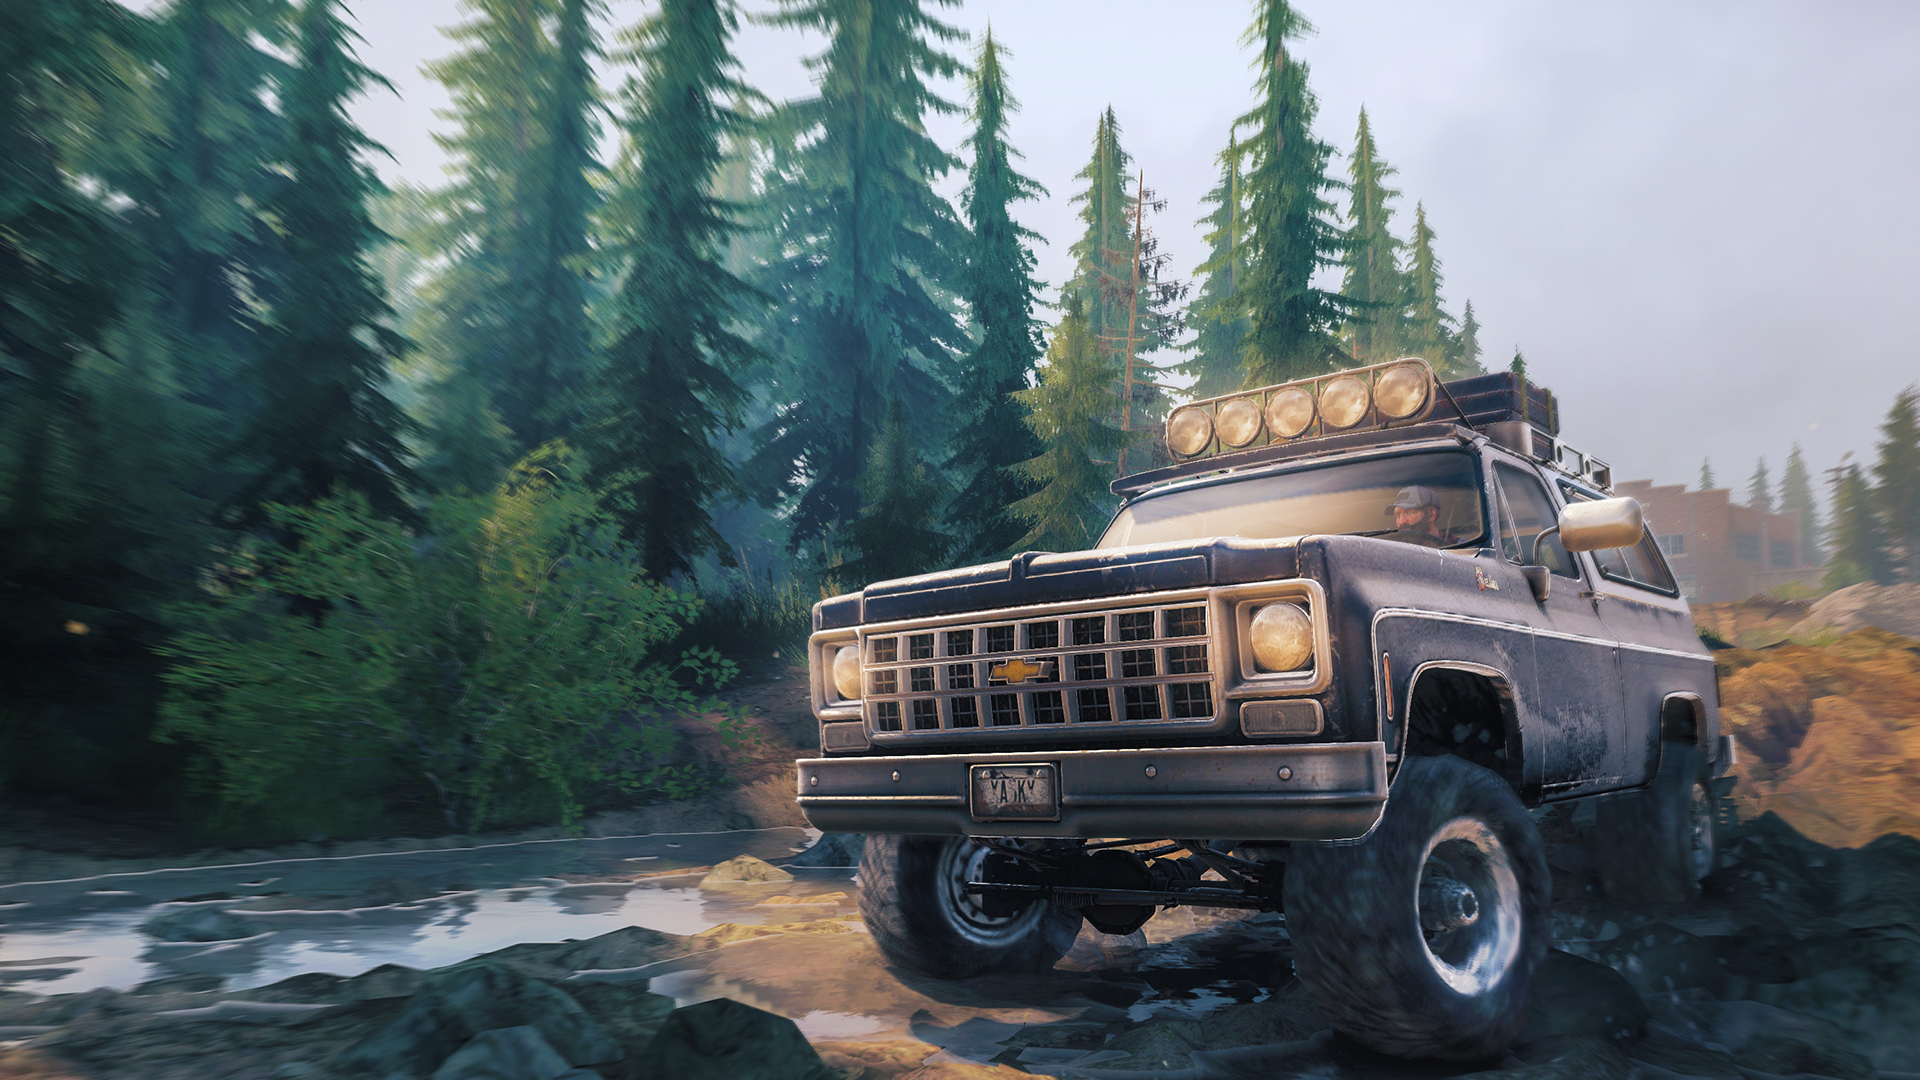 Expeditions a mudrunner game прохождение. SPINTIRES Mud Runner. SPINTIRES: MUDRUNNER - American Wilds. Spin Tires MUDRUNNER на Нинтендо свитч. MUDRUNNER Chevrolet k10.